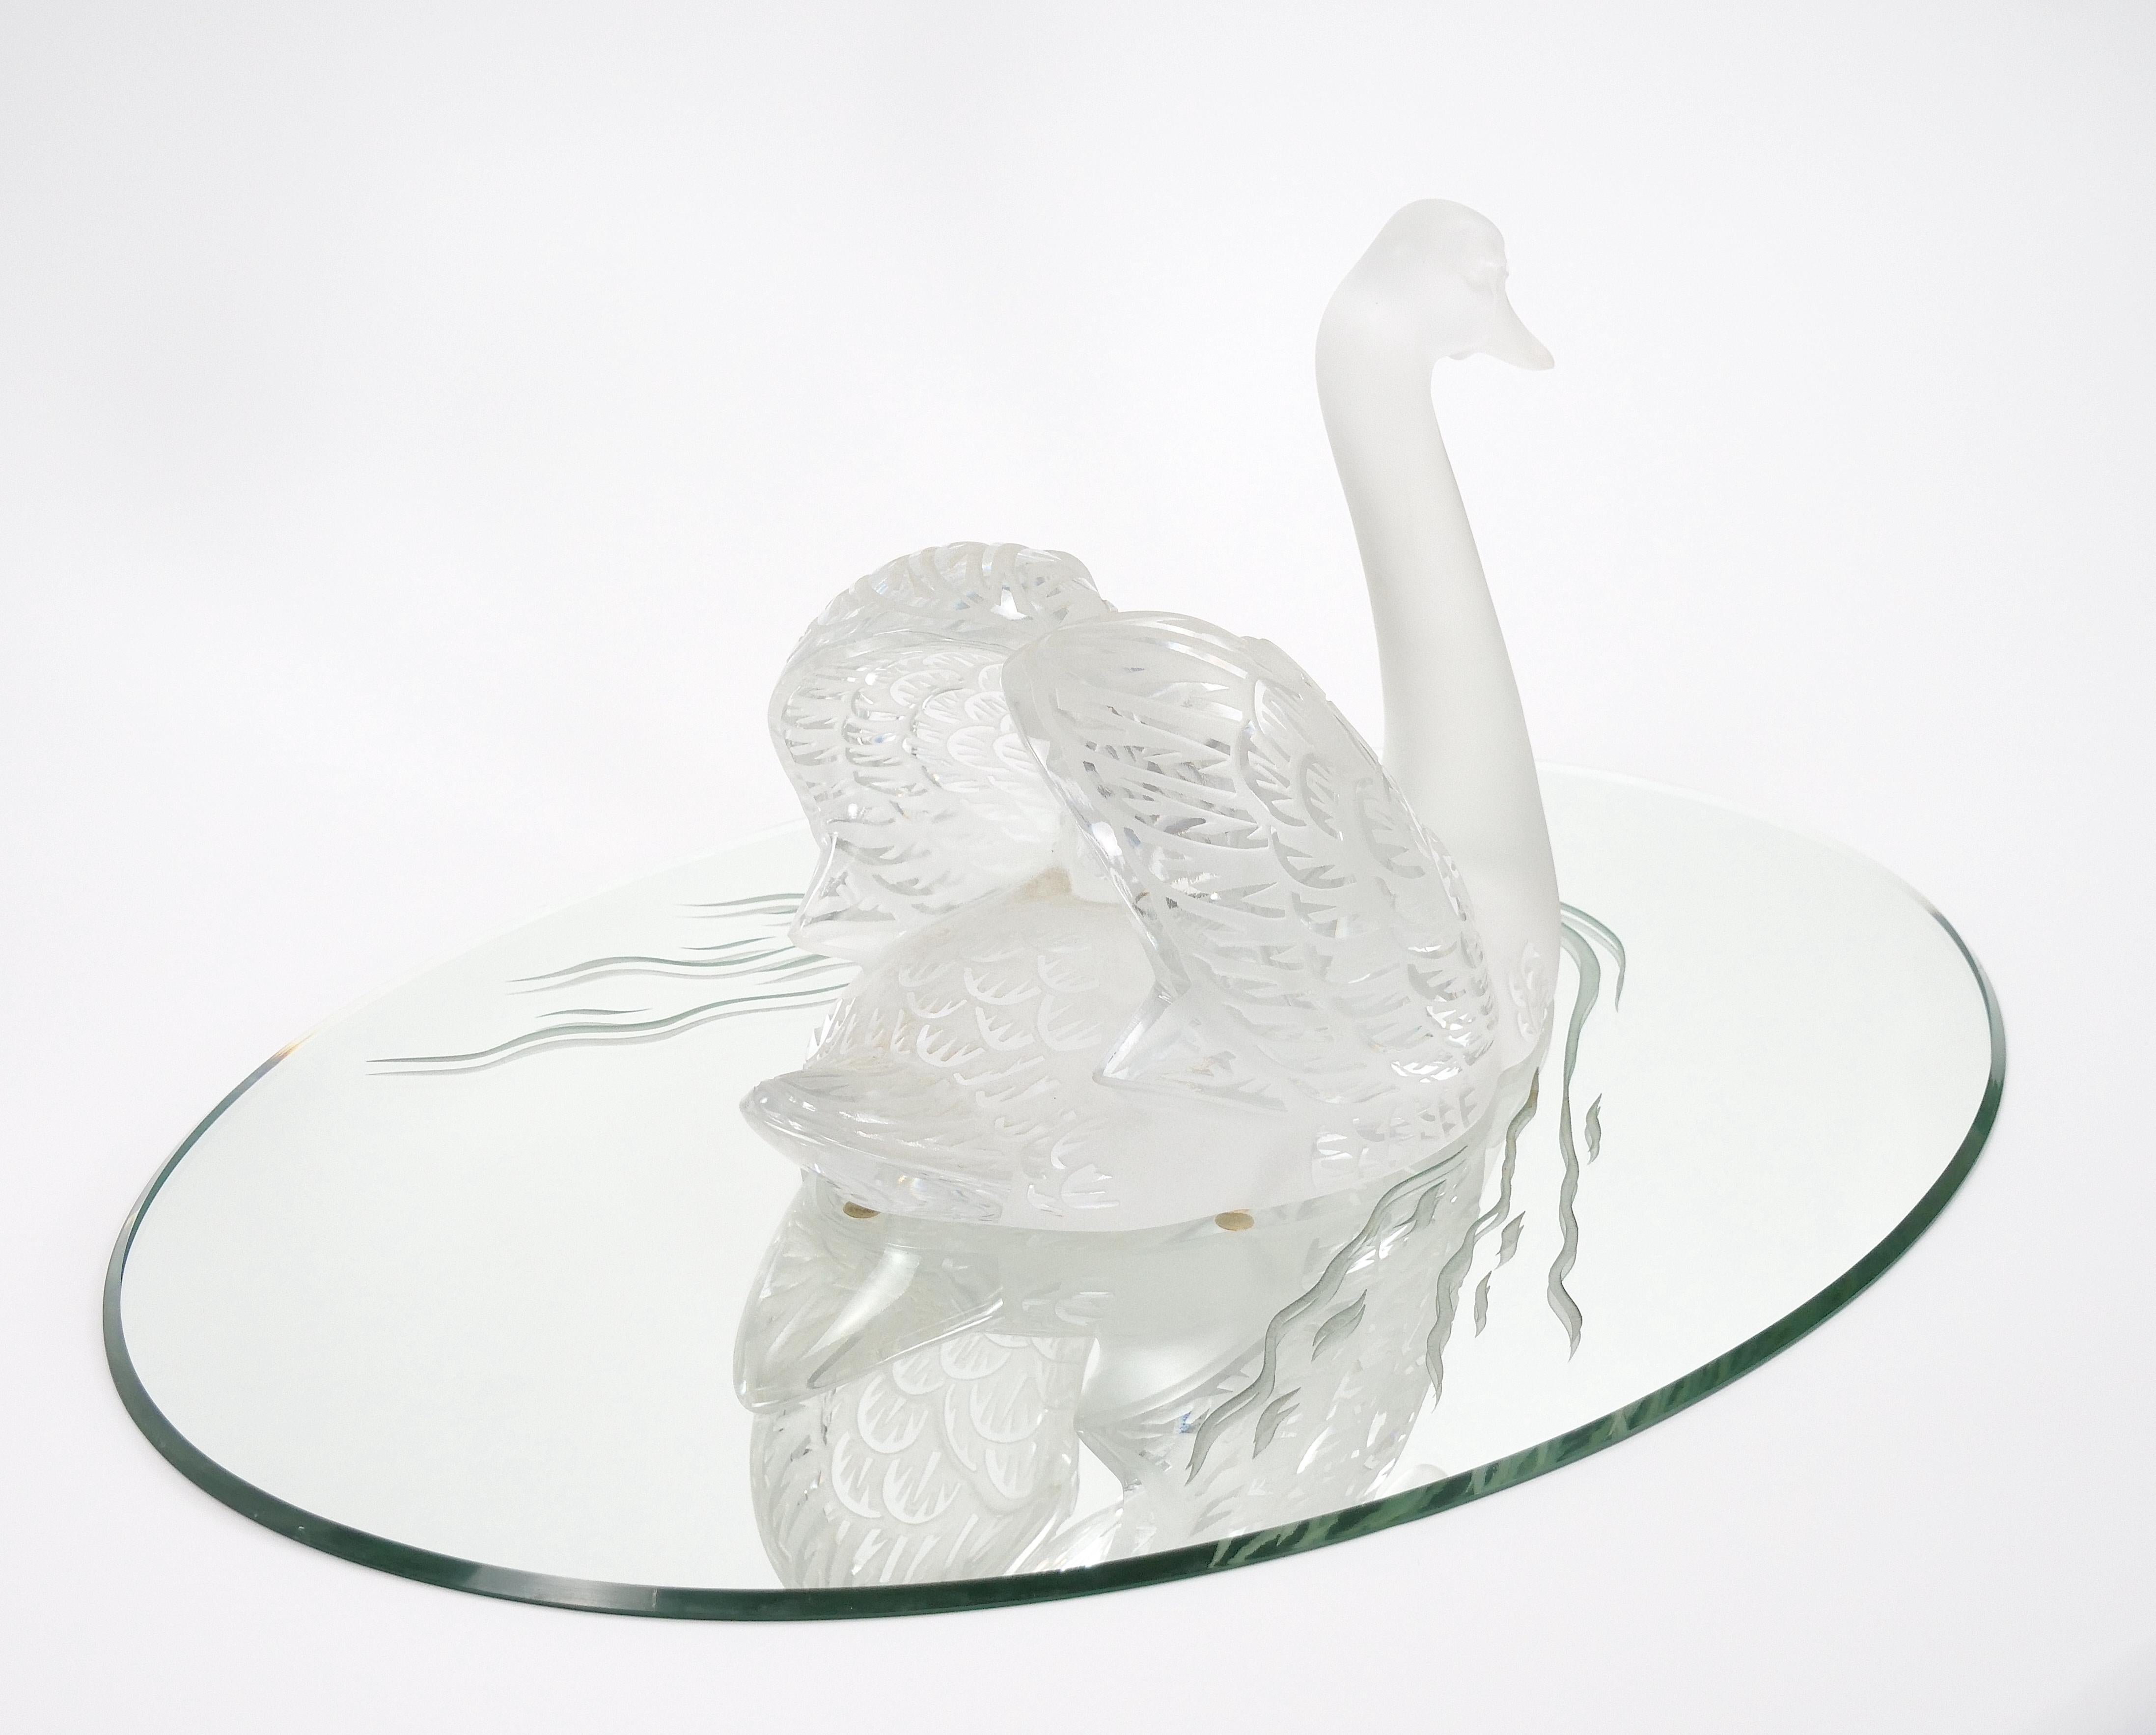  Lalique Crystal Frosted Head Down Swan Sculpture Resting On Mirrored Plateau Bon état - En vente à Tarry Town, NY